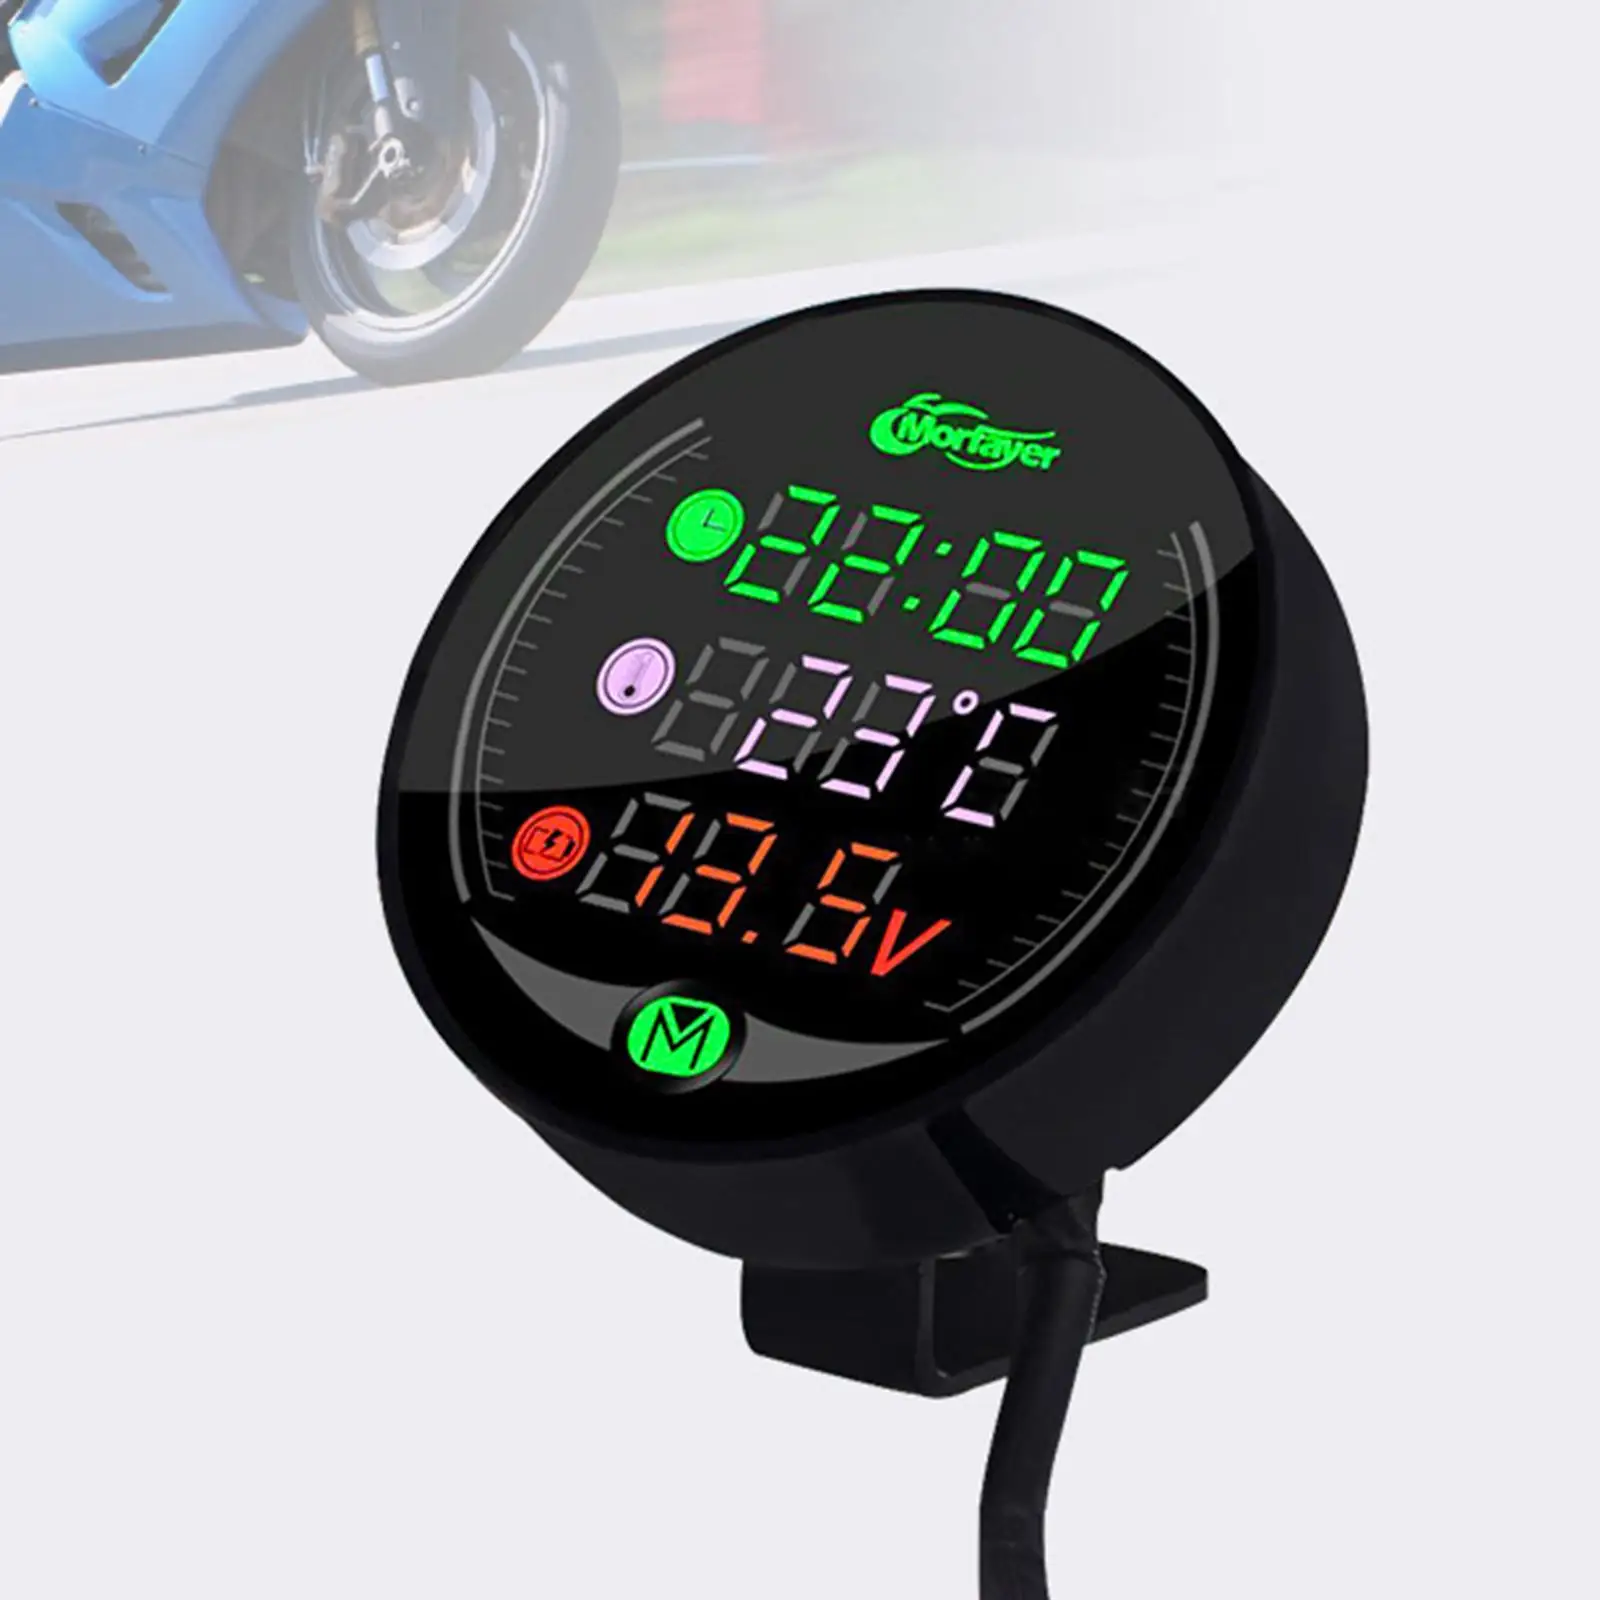 Motorbike Motorcycle Digital Voltage Temperature Monitor 12V 24V Power Accessories LED Display Small Size Waterproof Easy Mount